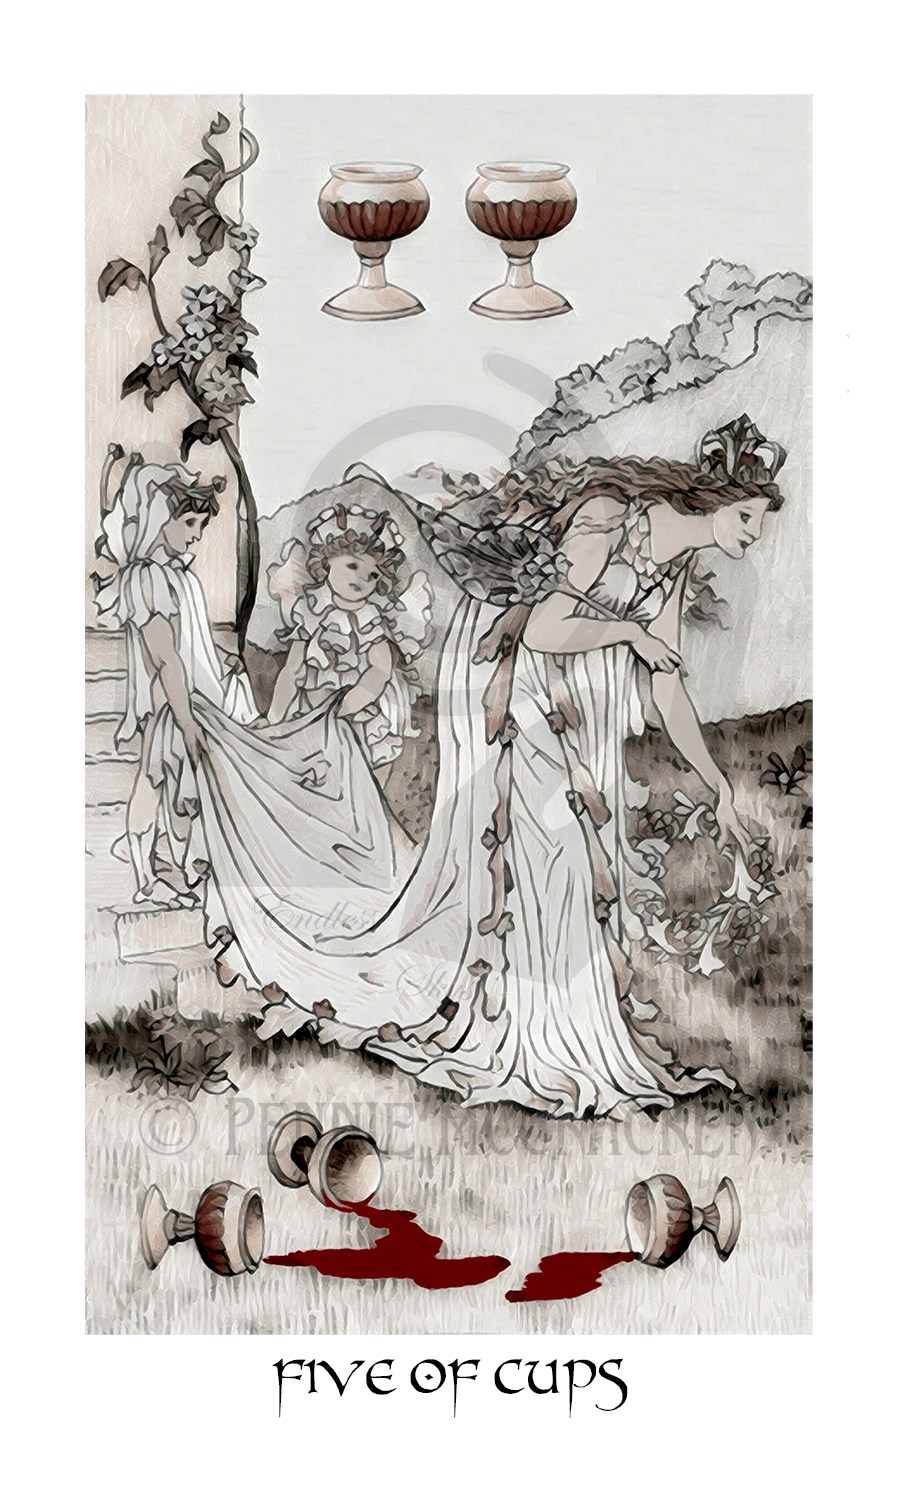 Harmonious Tarot  in a "Muted" Vintage Design by Pennie McCracken - Endless Skys